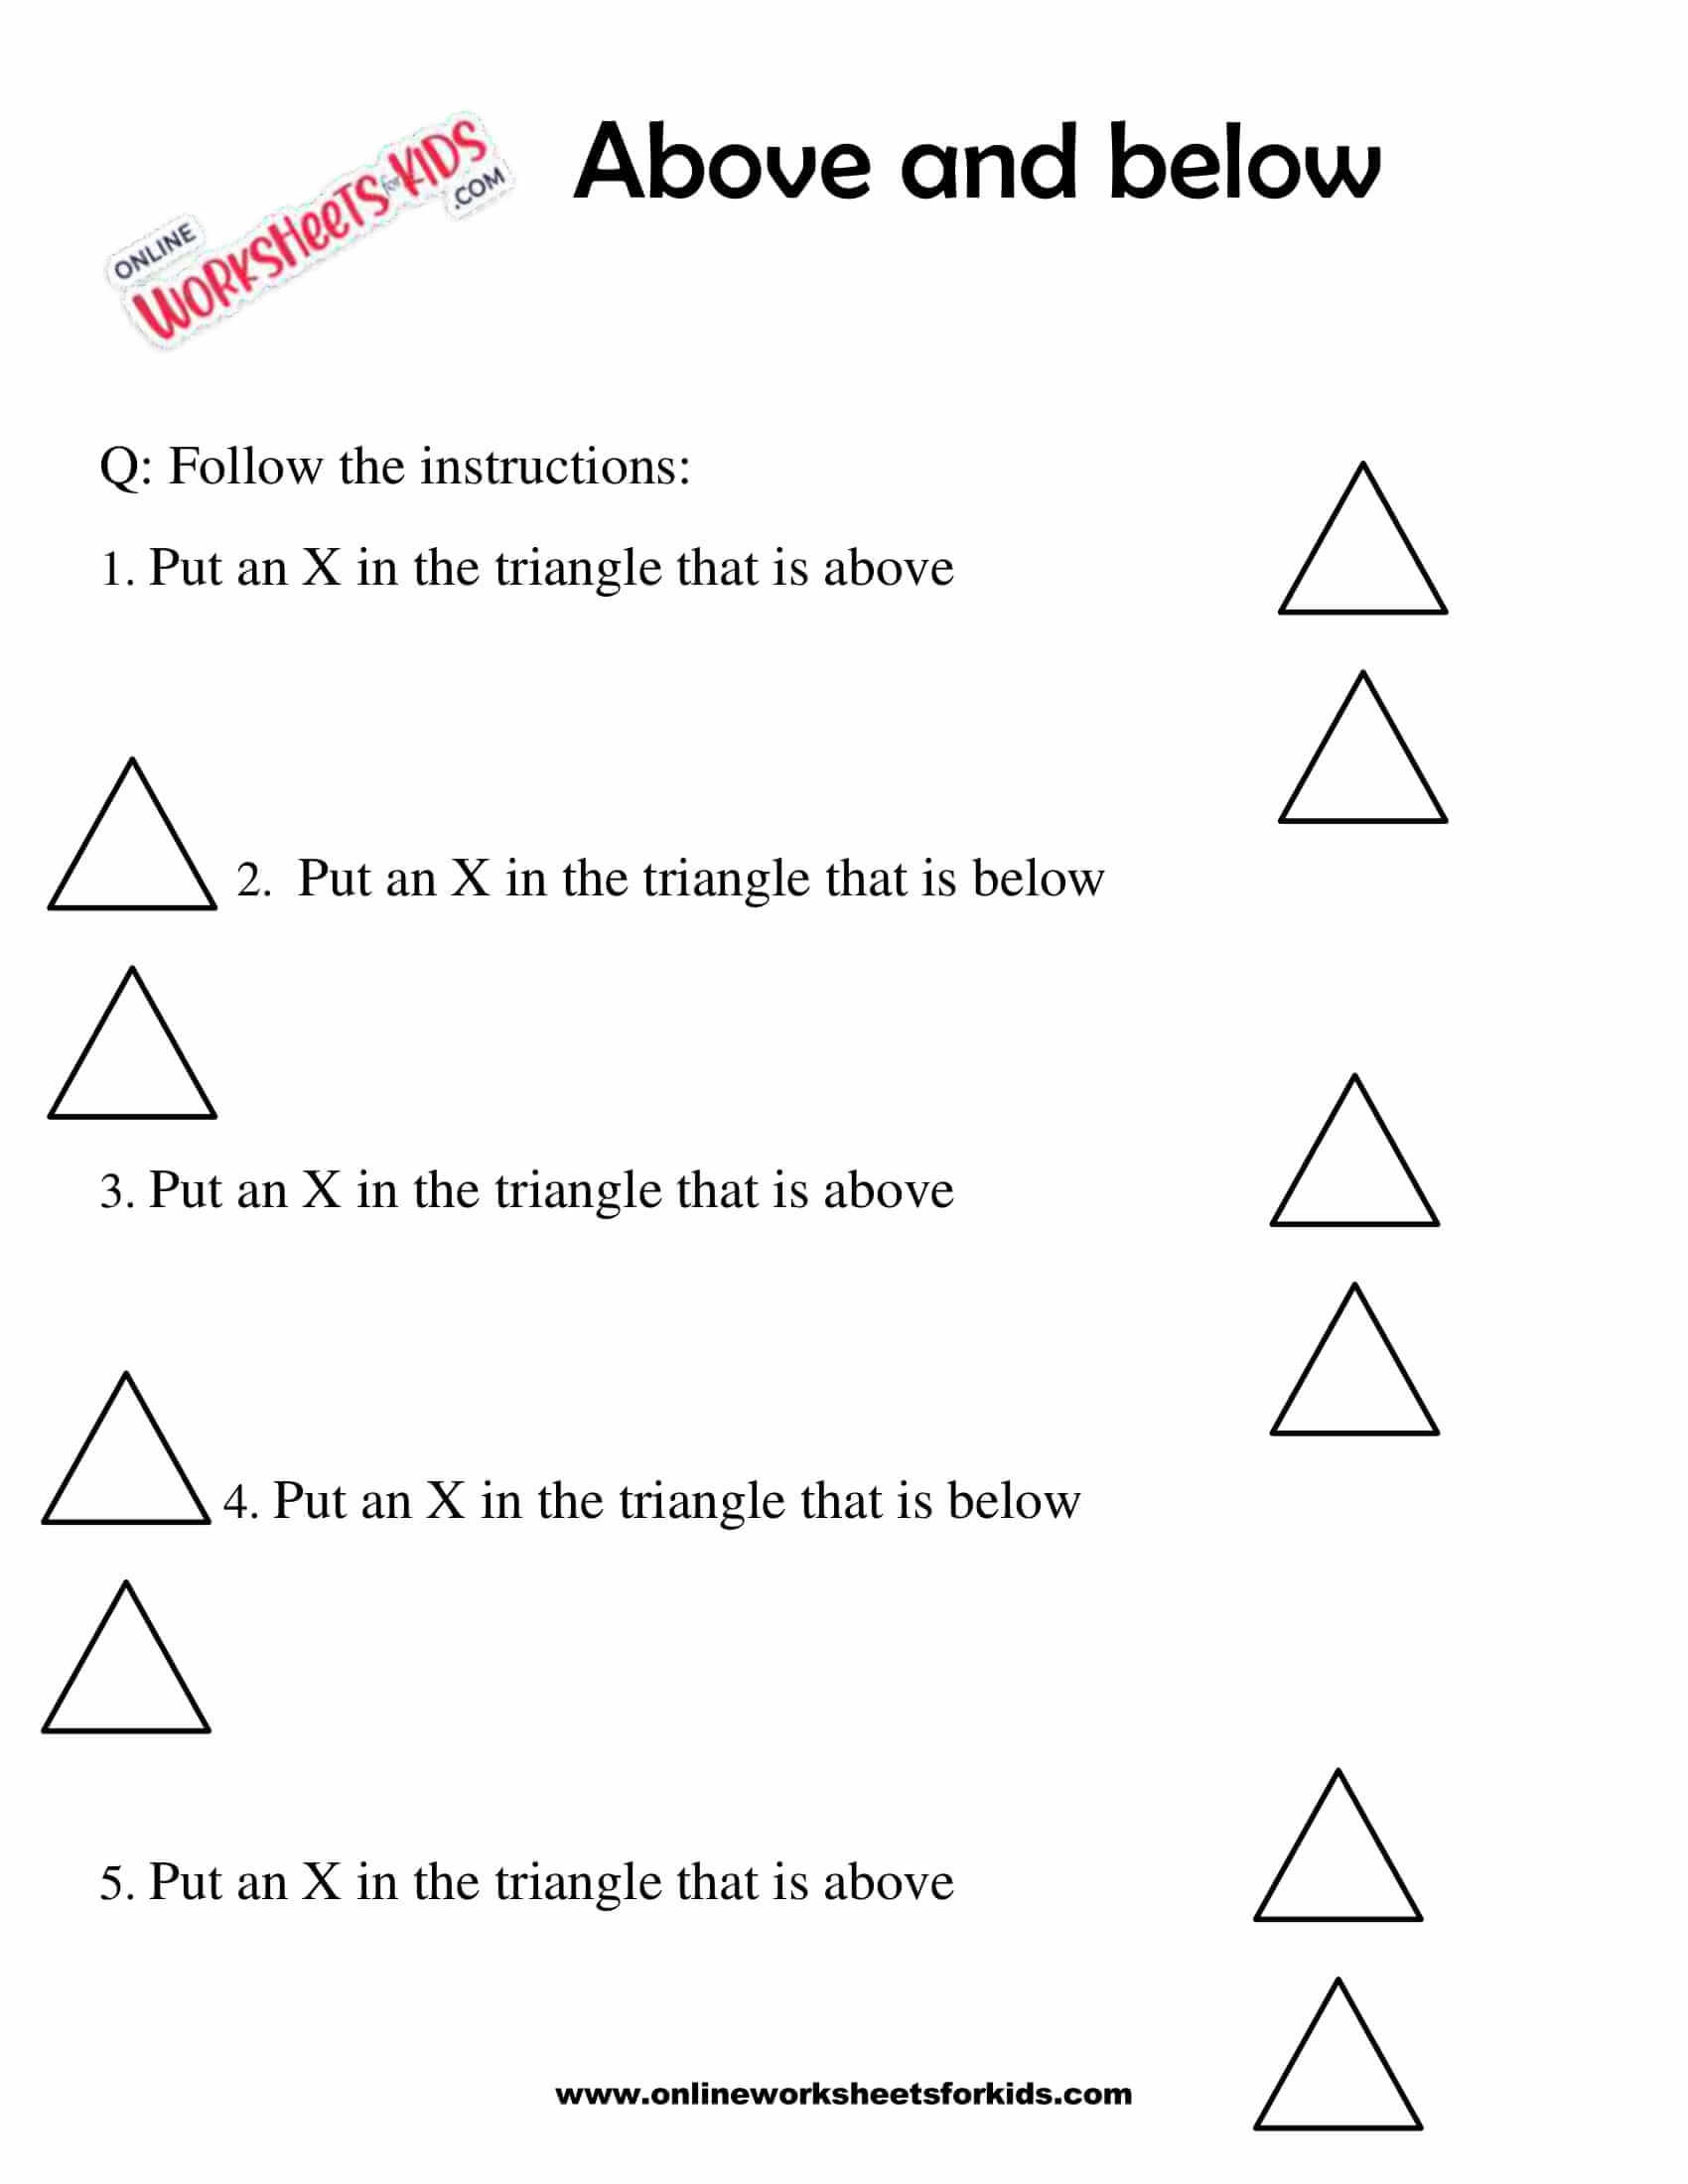 above-and-below-worksheets-9